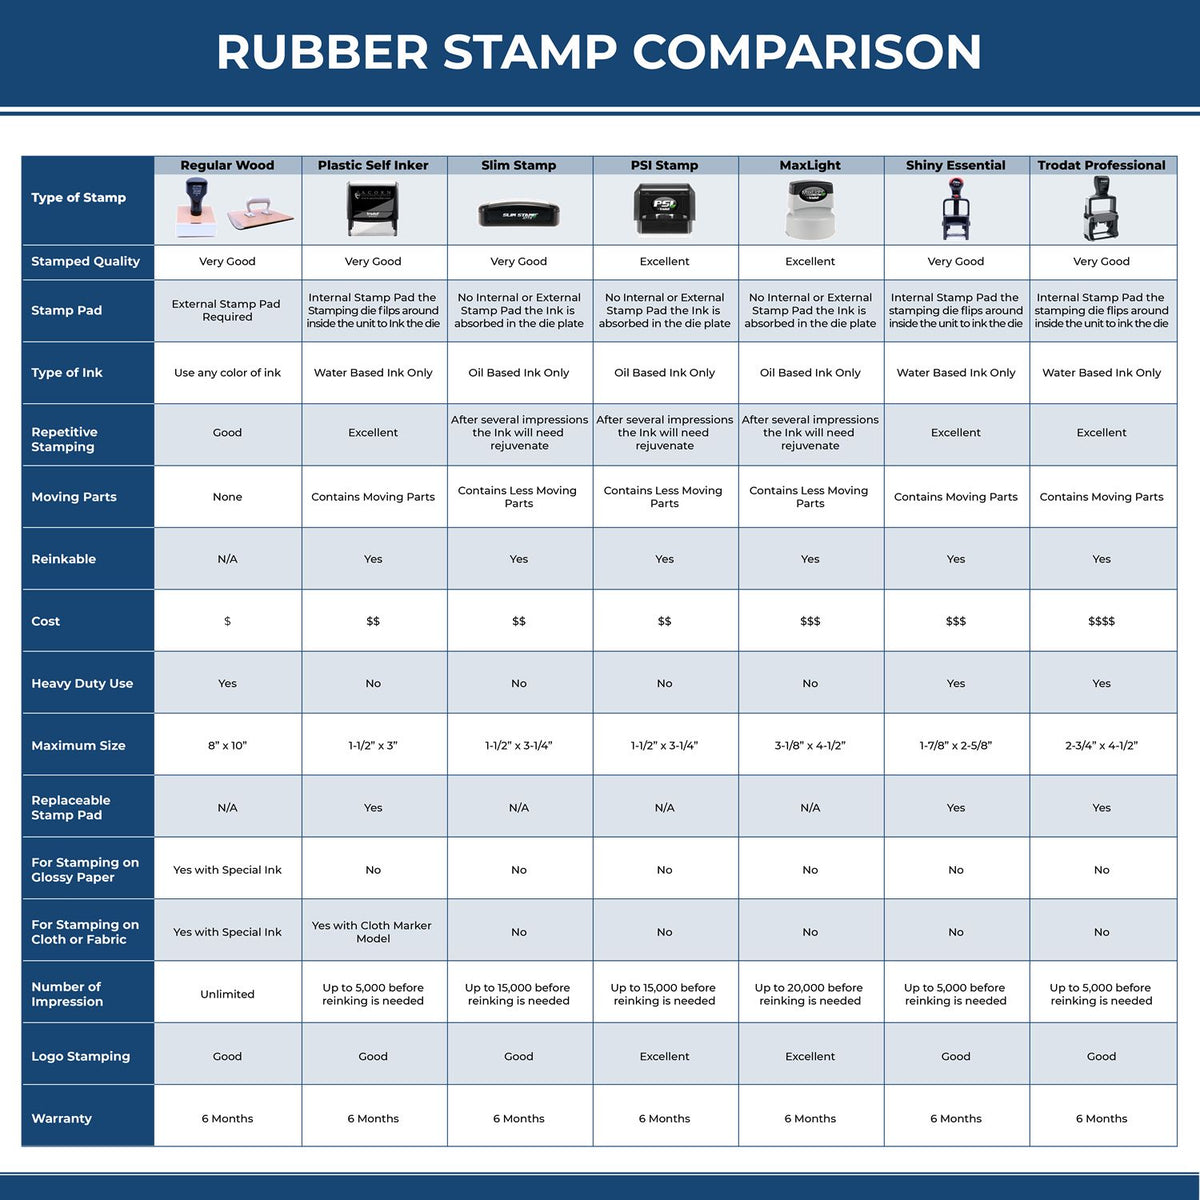 Curly Copy Rubber Stamp 4085R Rubber Stamp Comparison